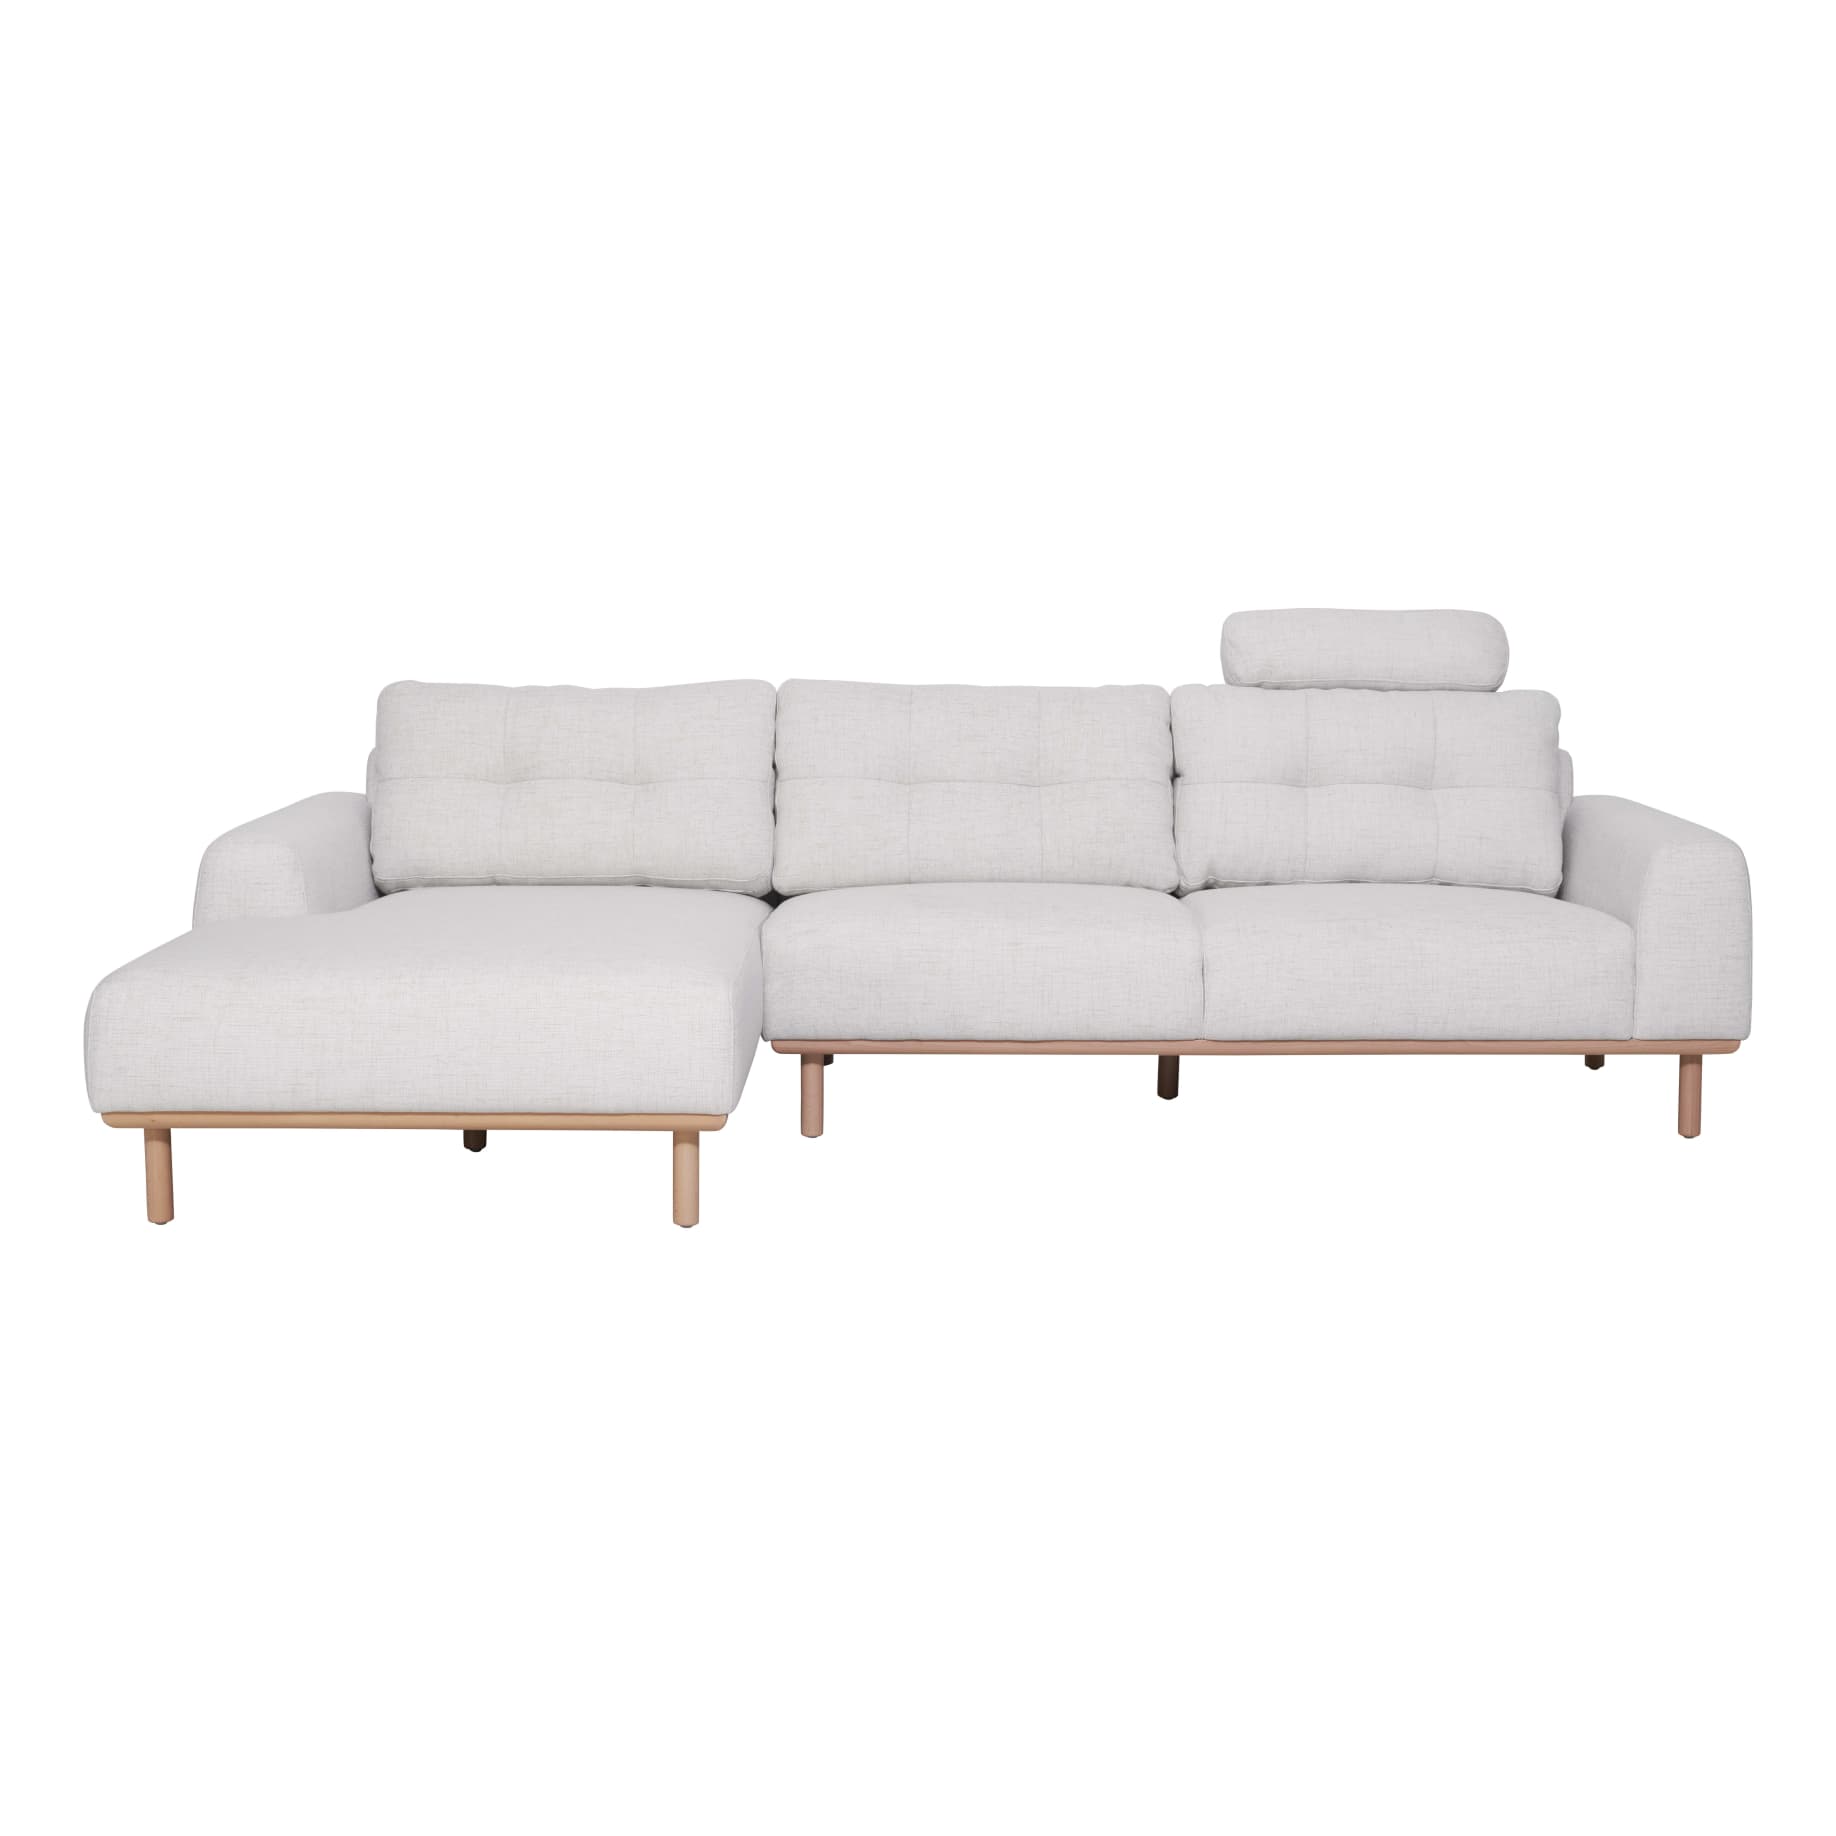 Stratton 3 Seater+Chaise LHF in Cloud White Sand